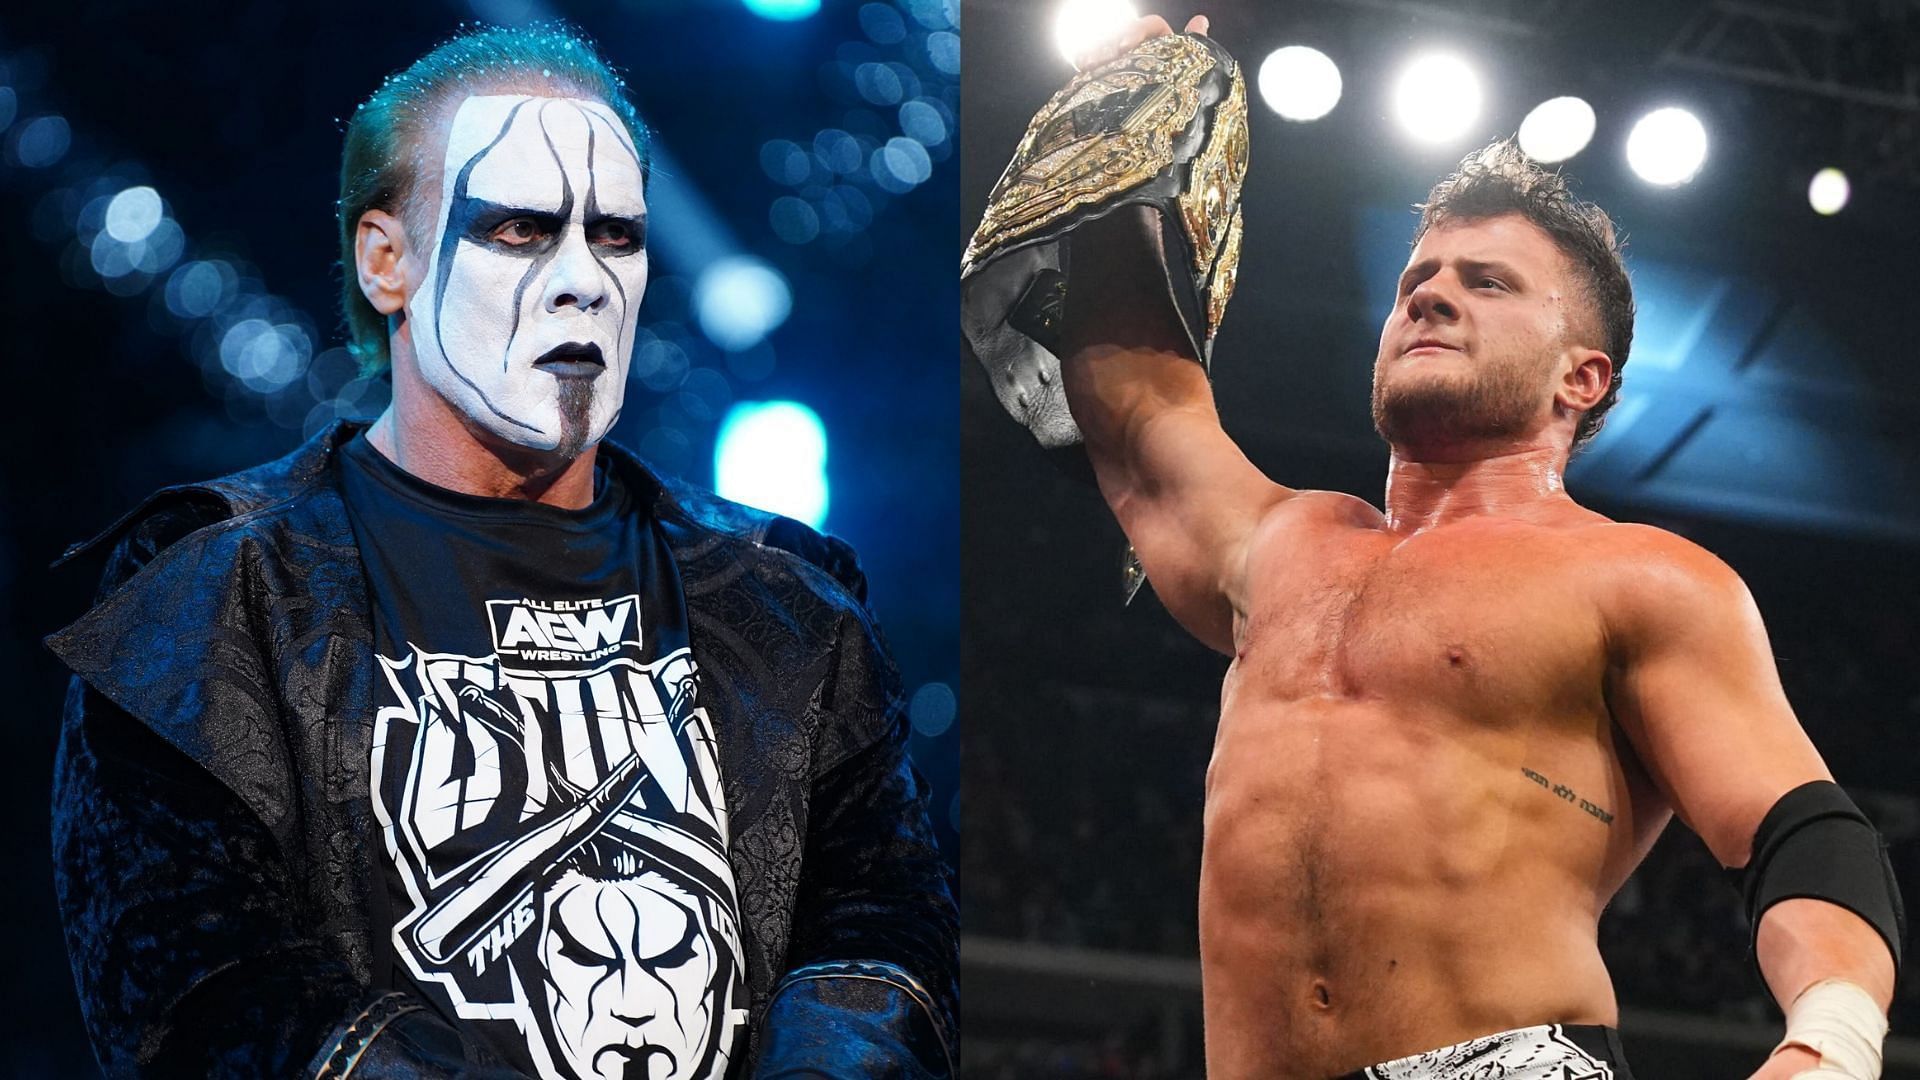 MJF could be the man to end Sting